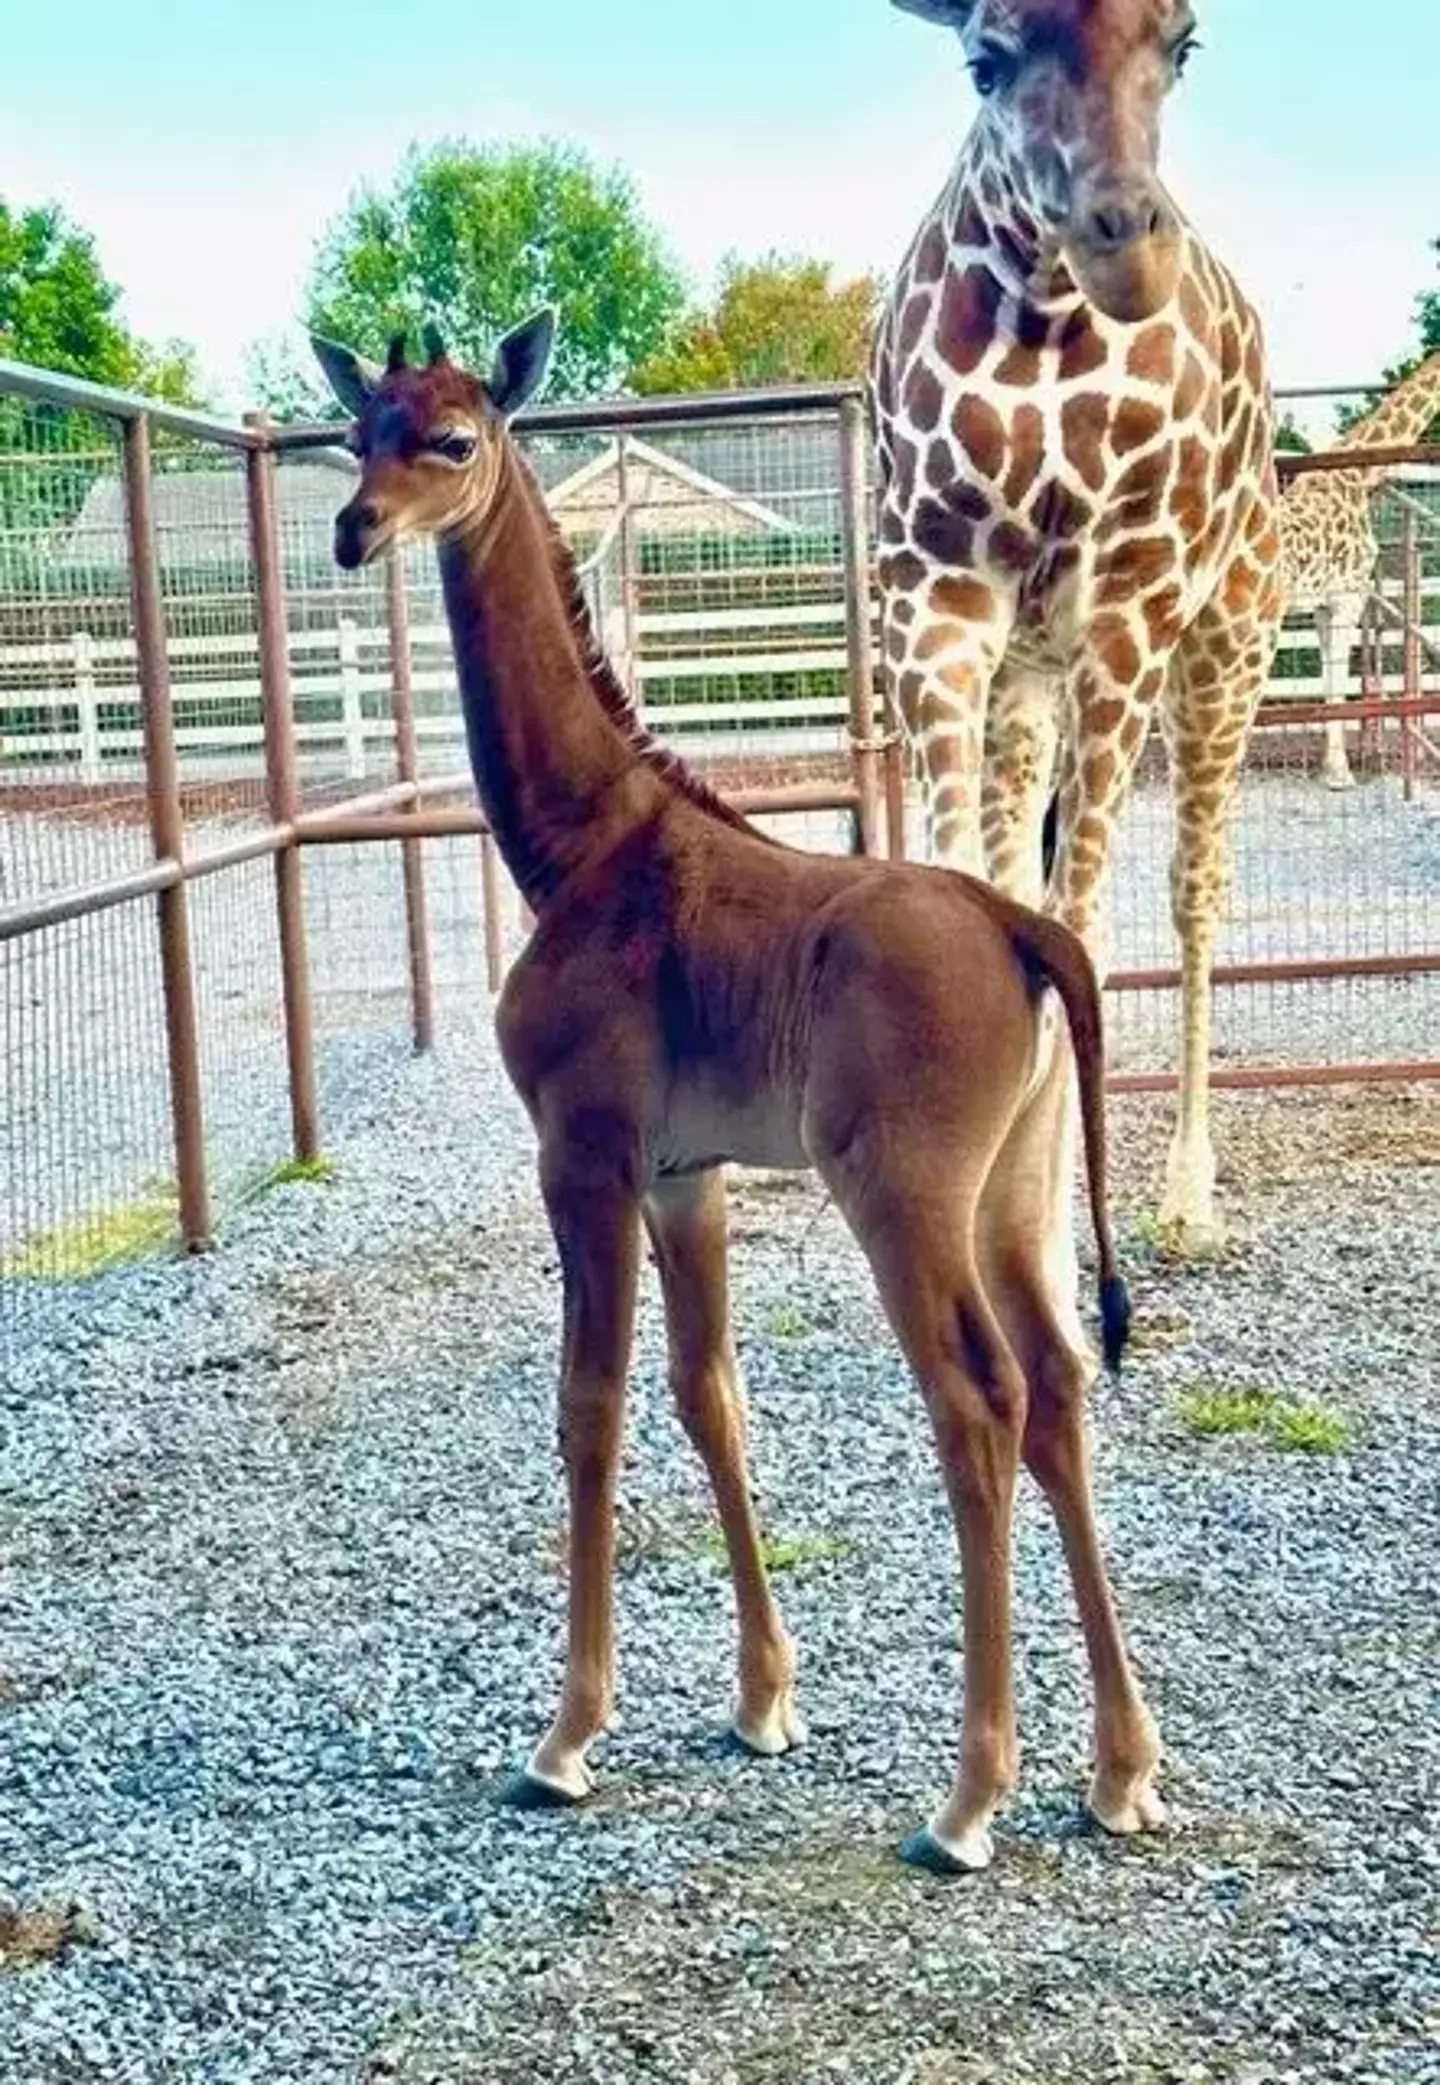 The baby giraffe stands at around six feet tall and has no spots.